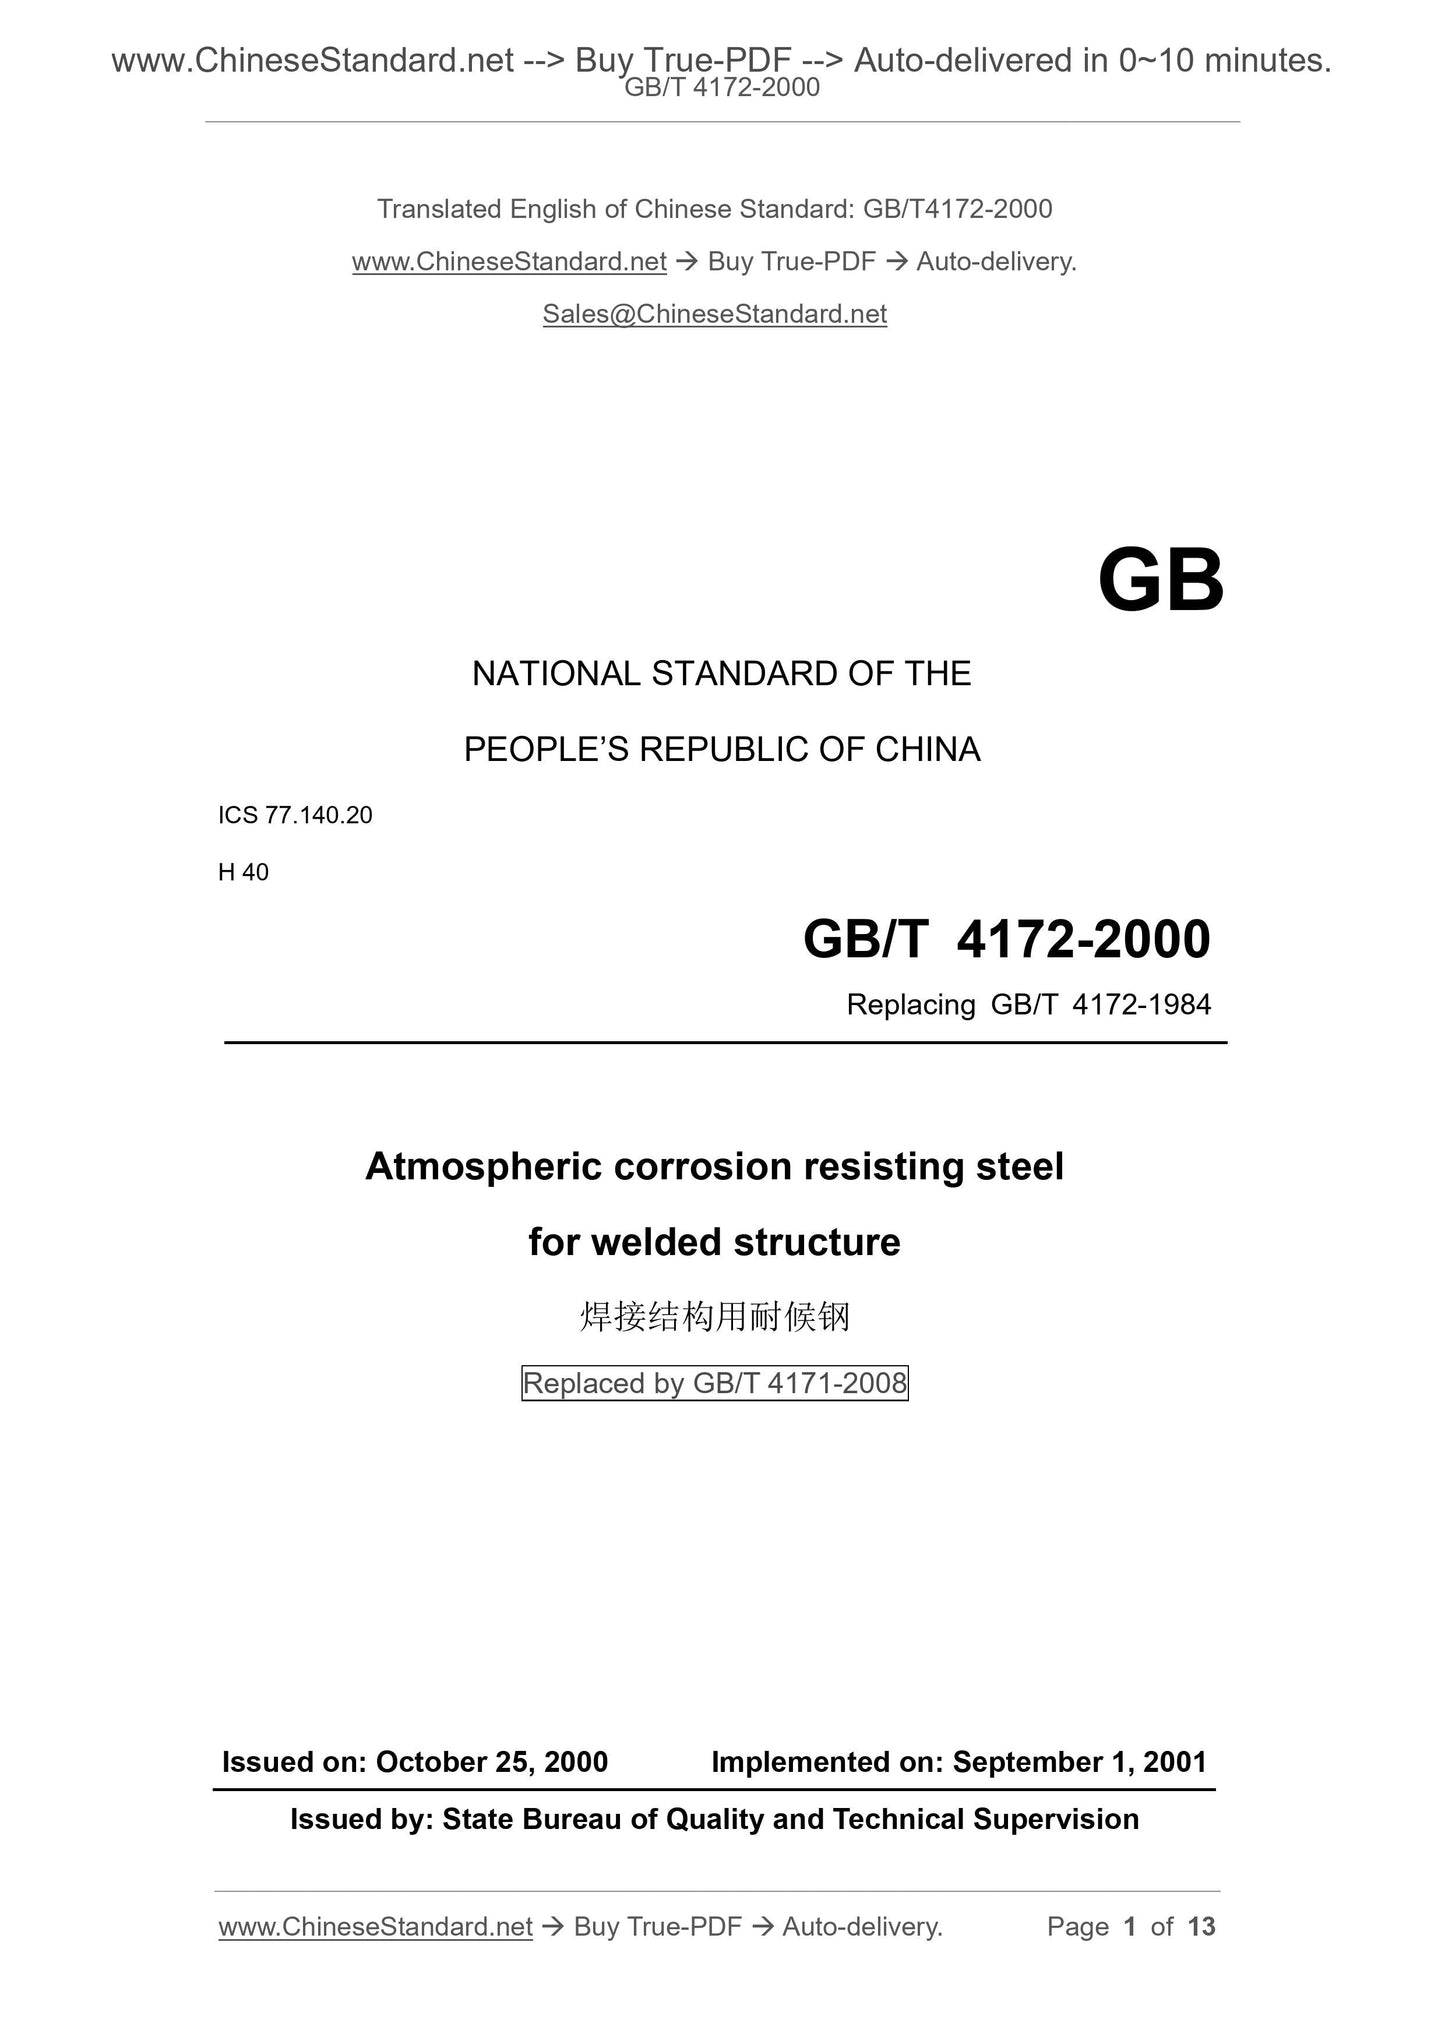 GB/T 4172-2000 Page 1